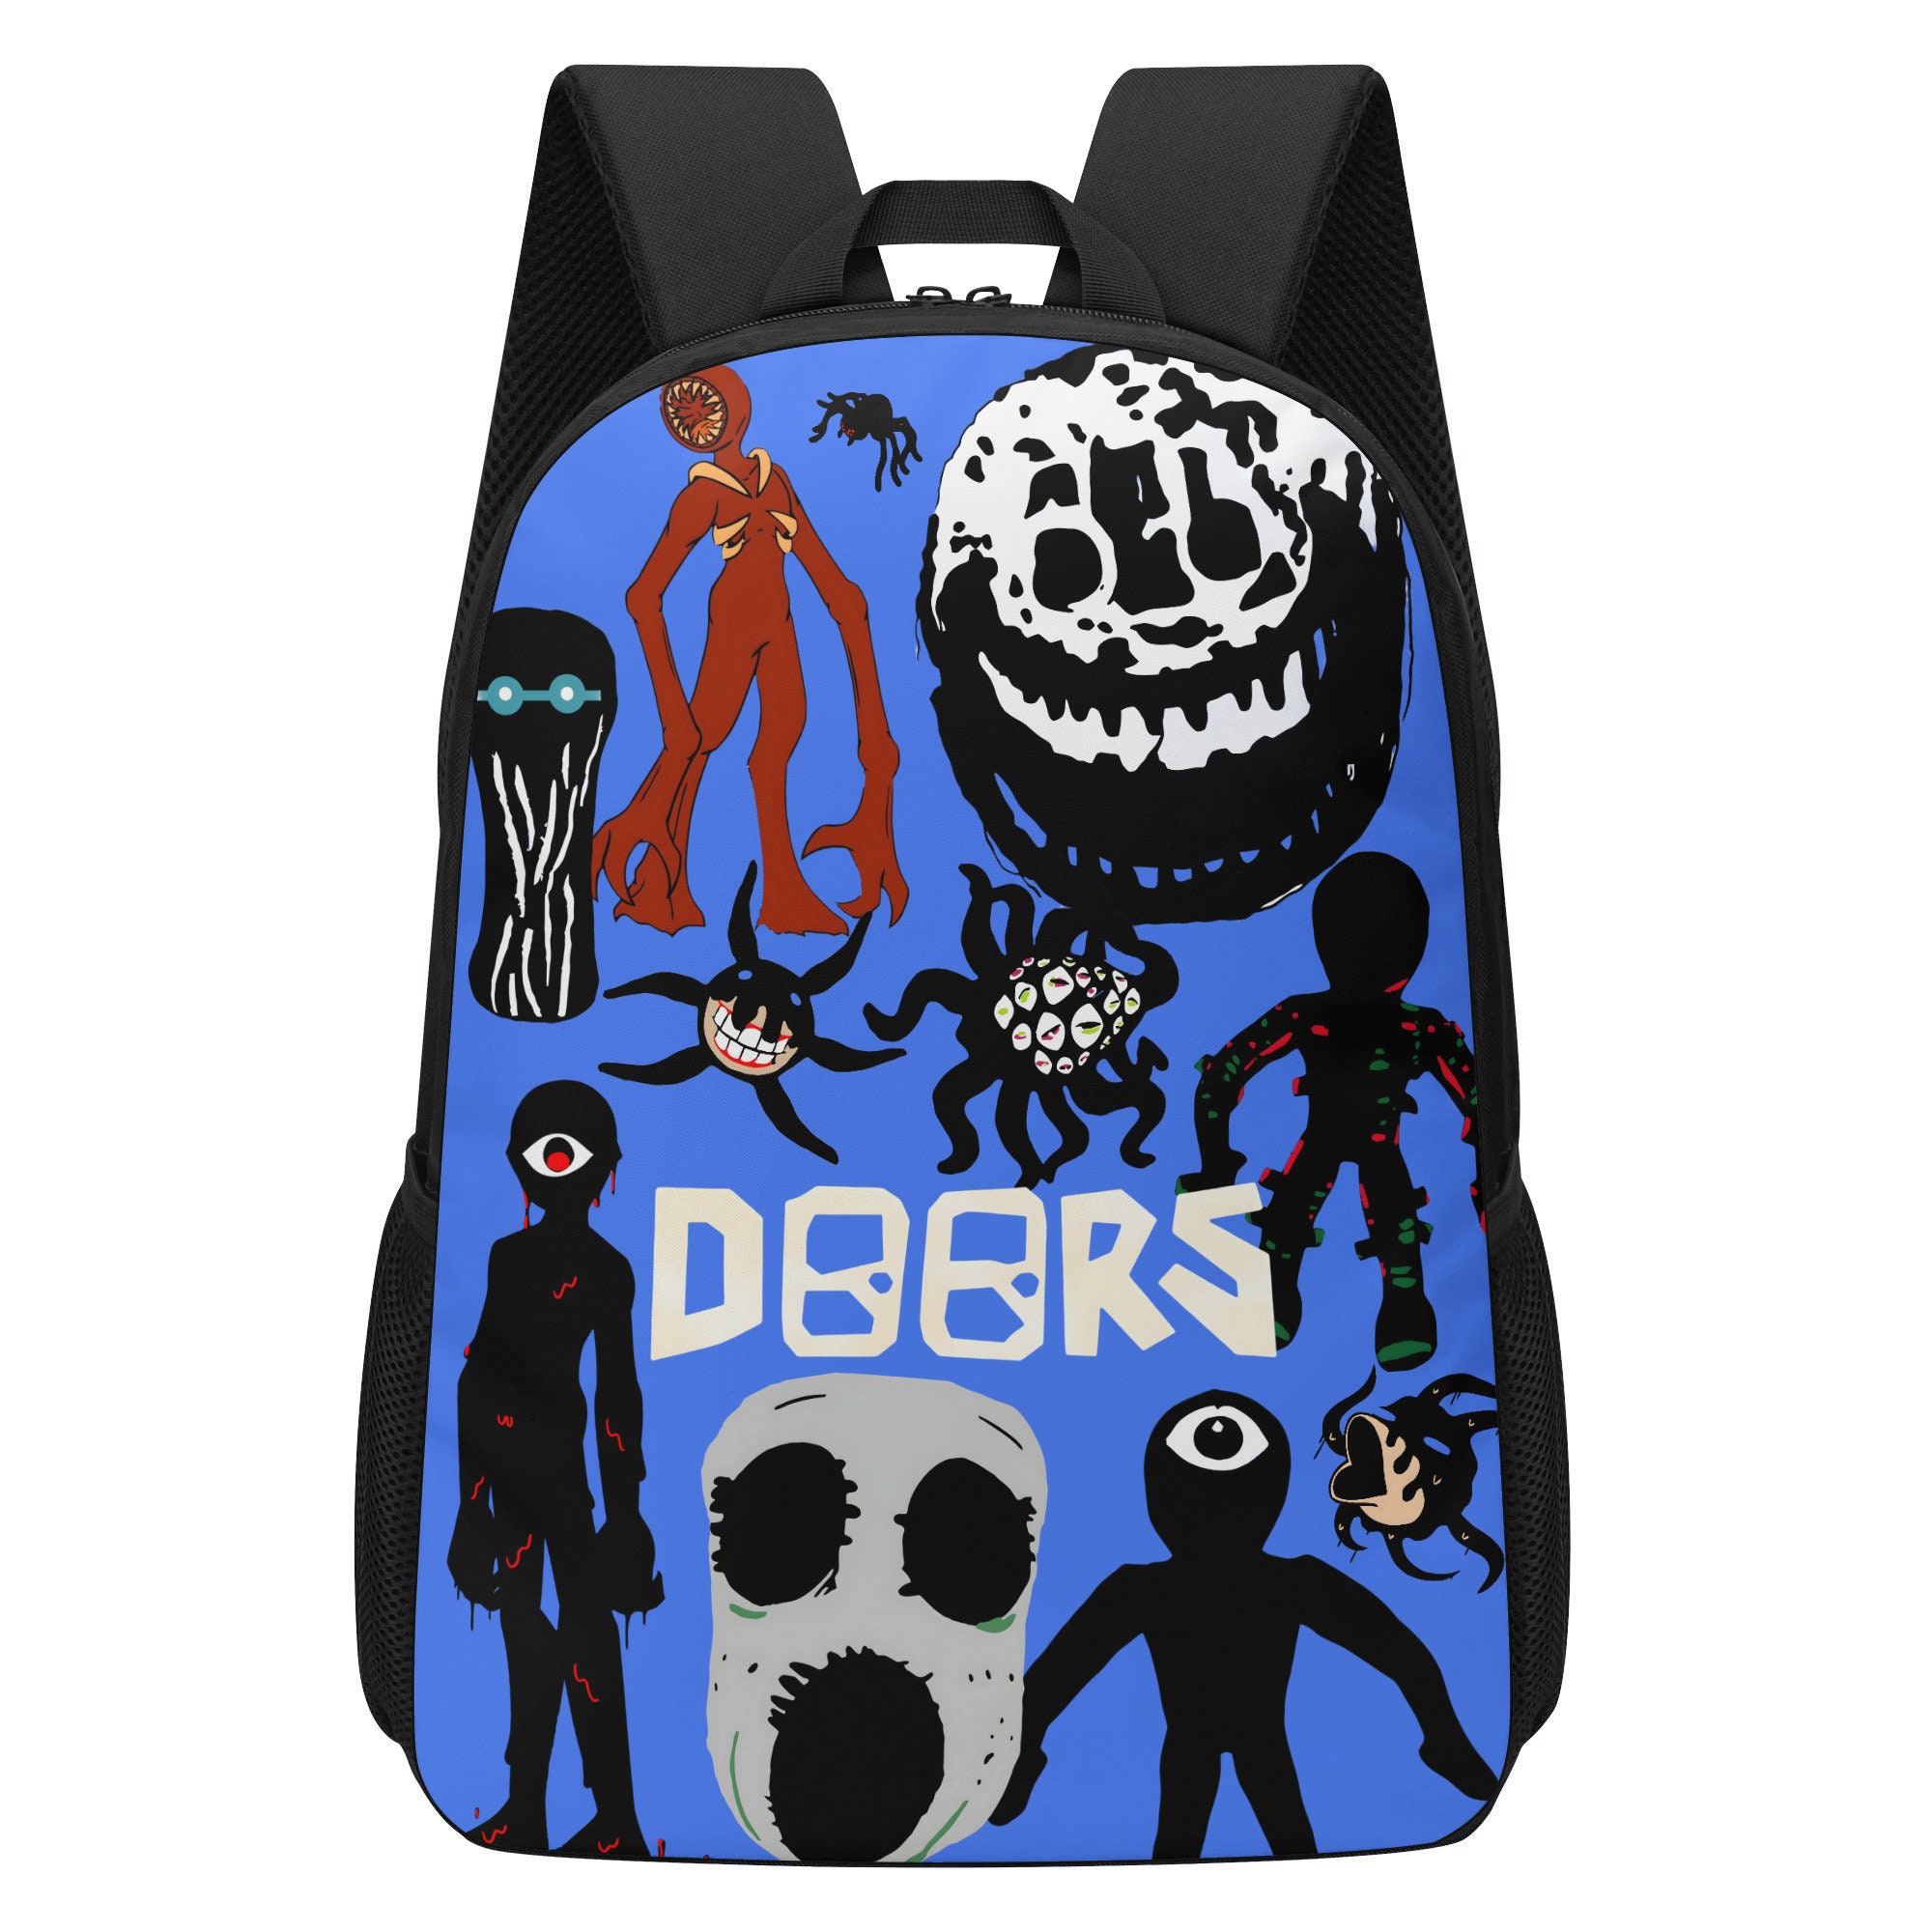 Doors Entities Everywhere  Backpack for Sale by TheBullishRhino